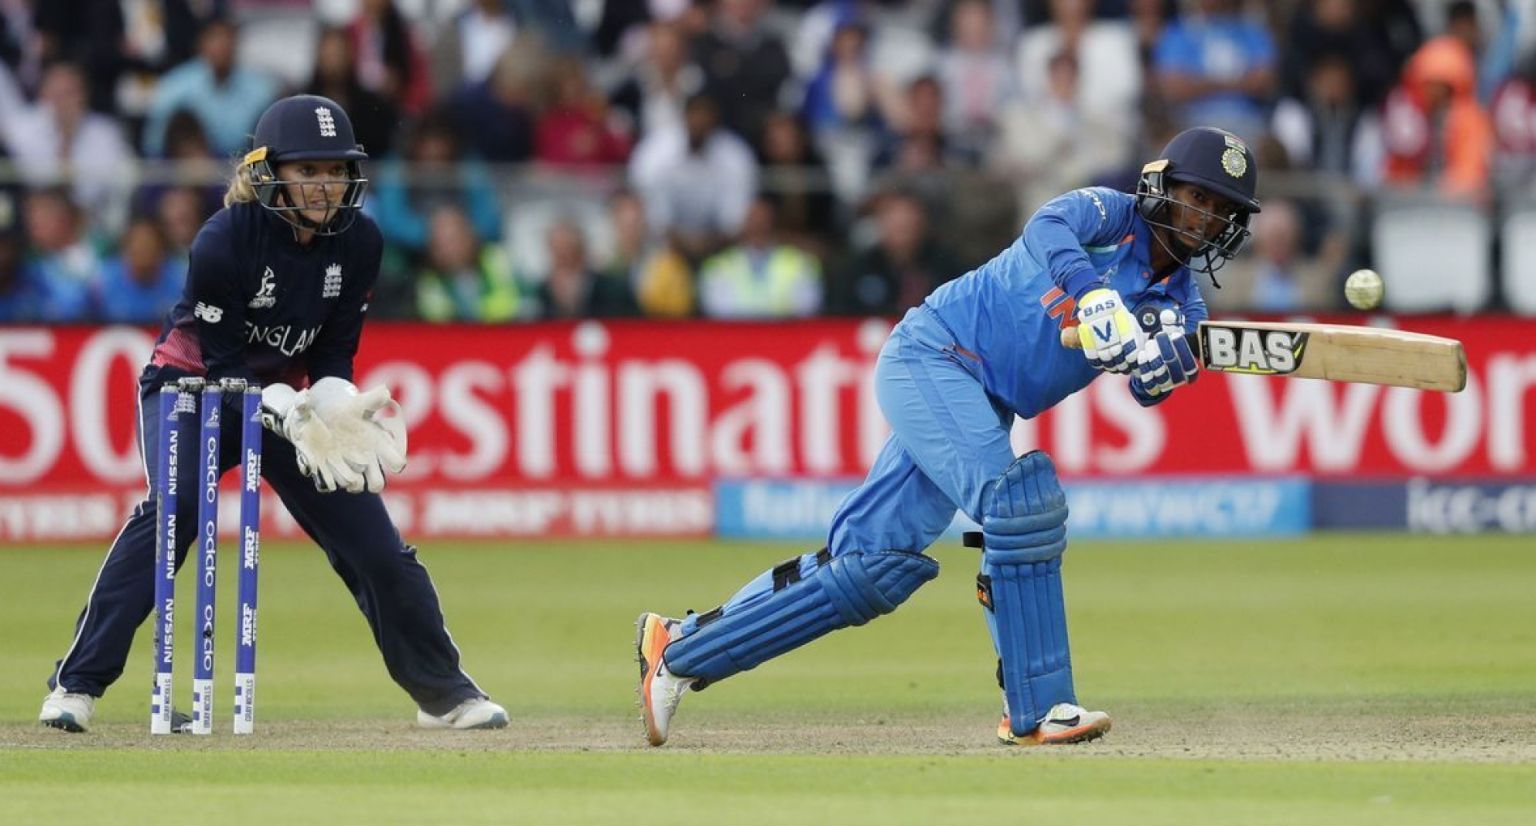 Dates changed for third T20I between India and England Women